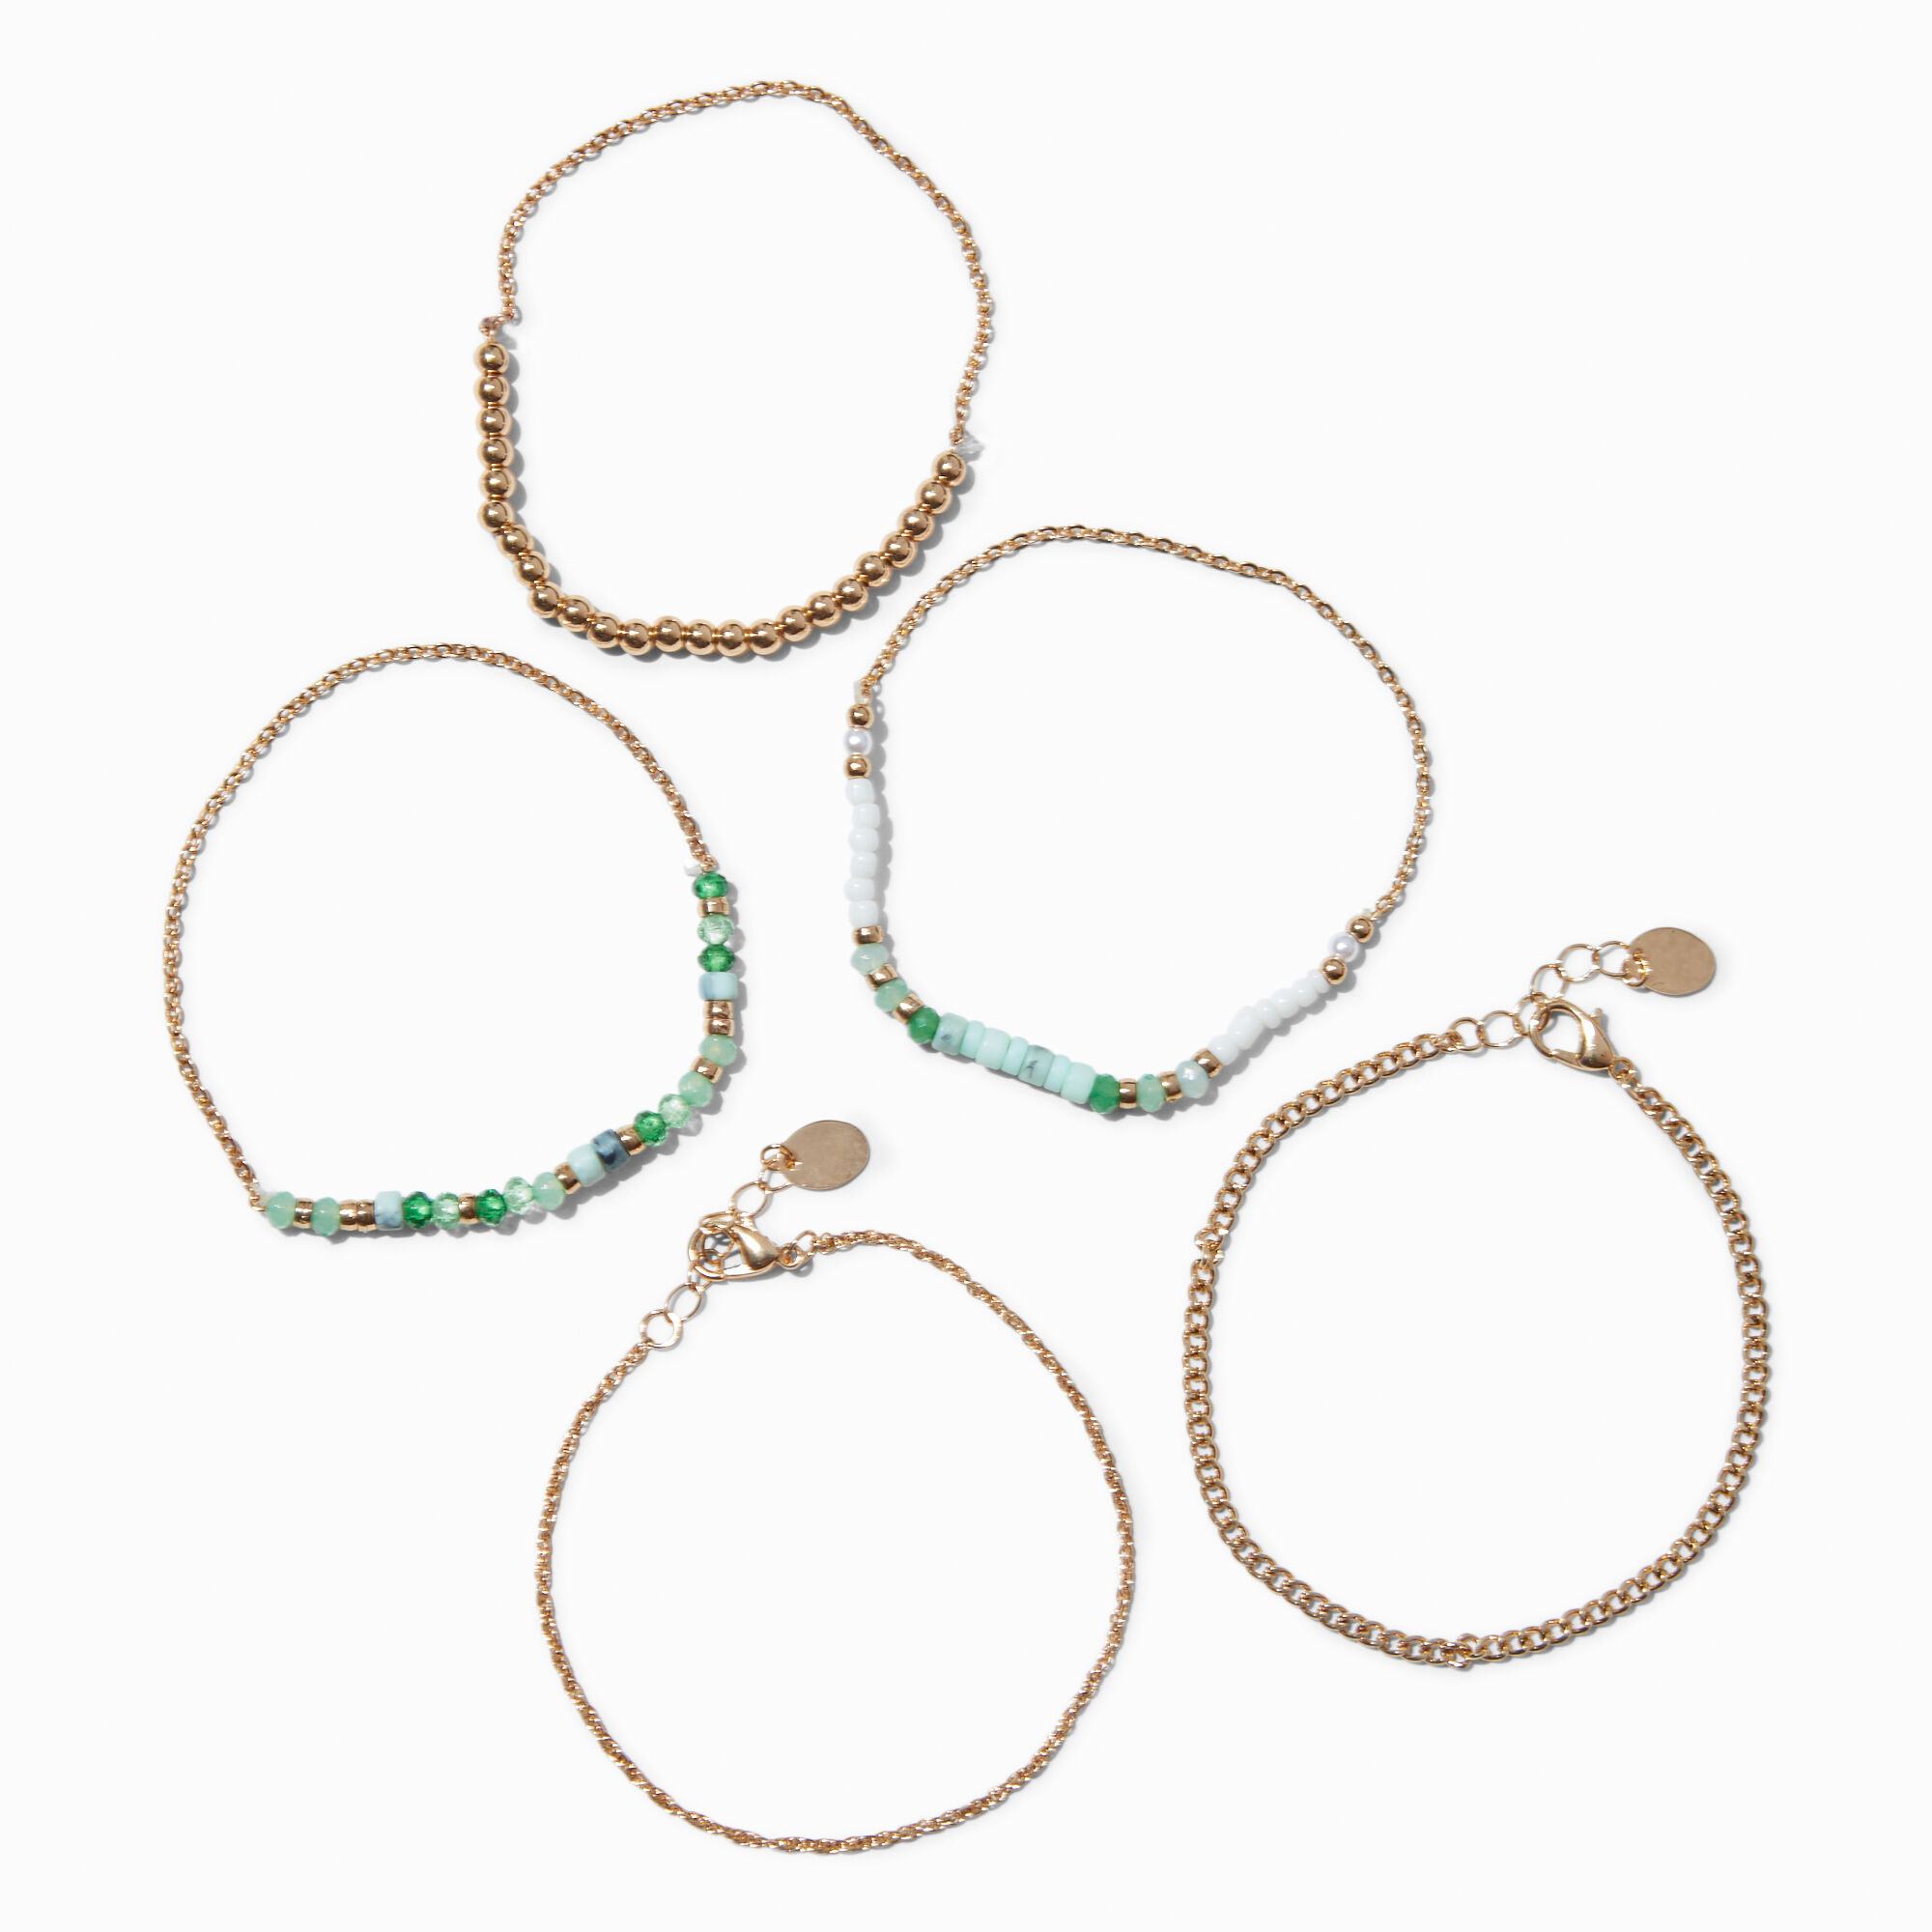 View Claires GoldTone Beaded Chain Bracelet Set 5 Pack Green information